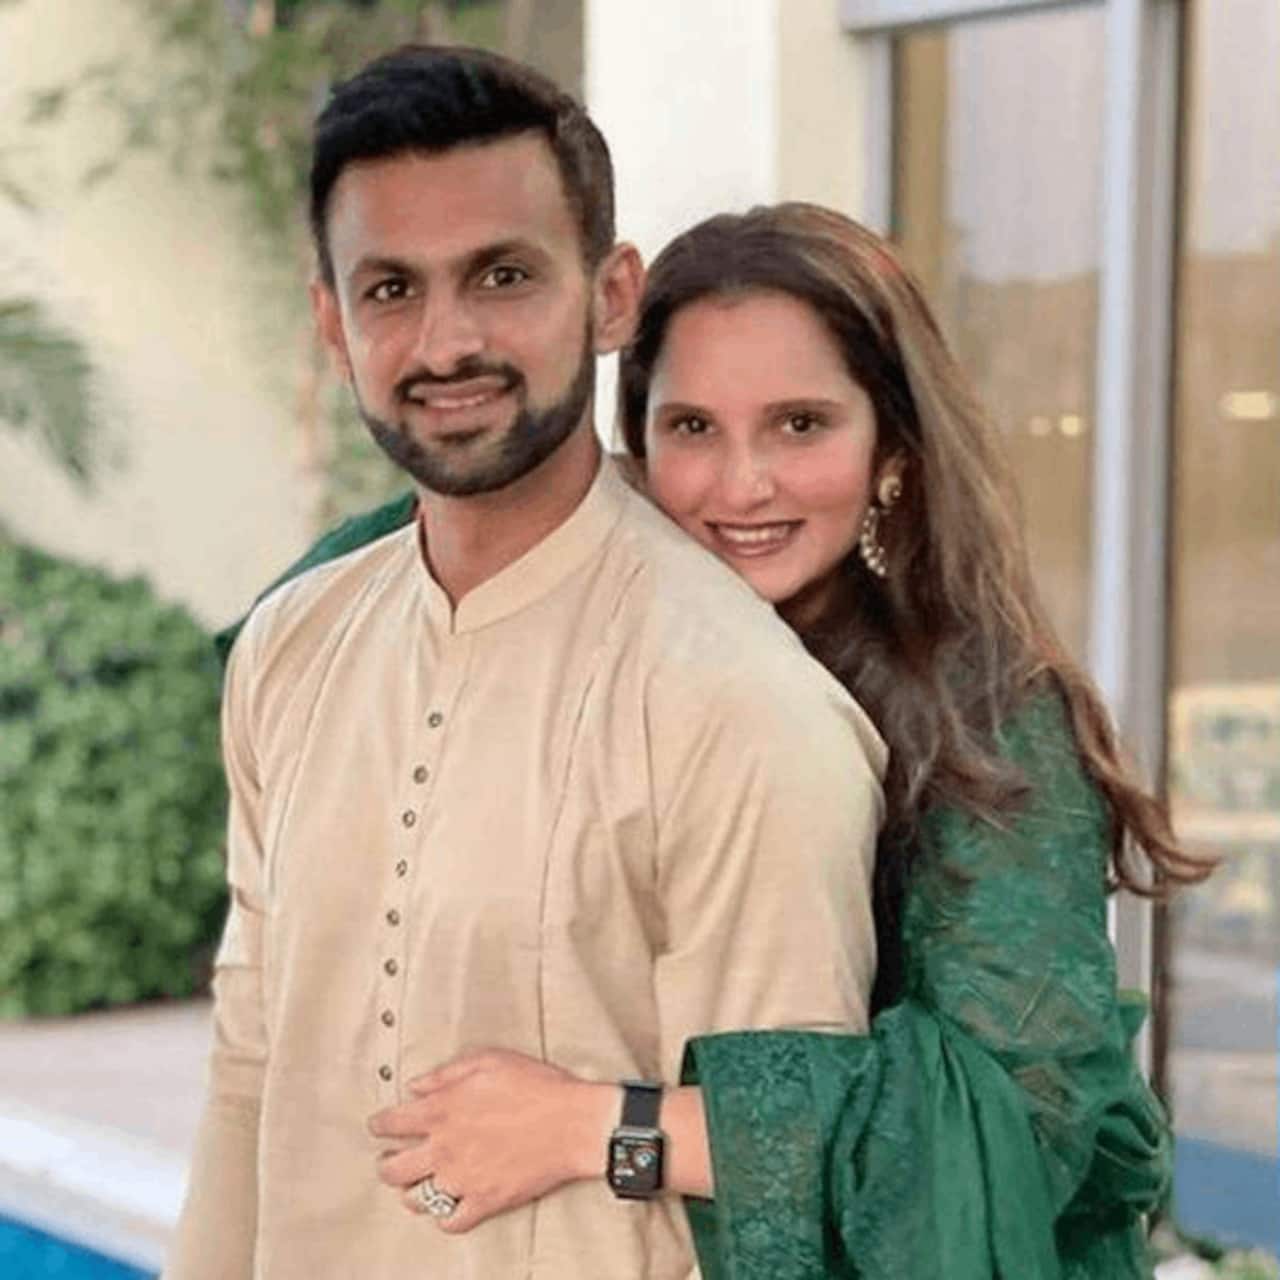 Sania Mirza-Shoaib Malik divorce: Legal issues stopping the star couple from announcing their split? Here's what we know